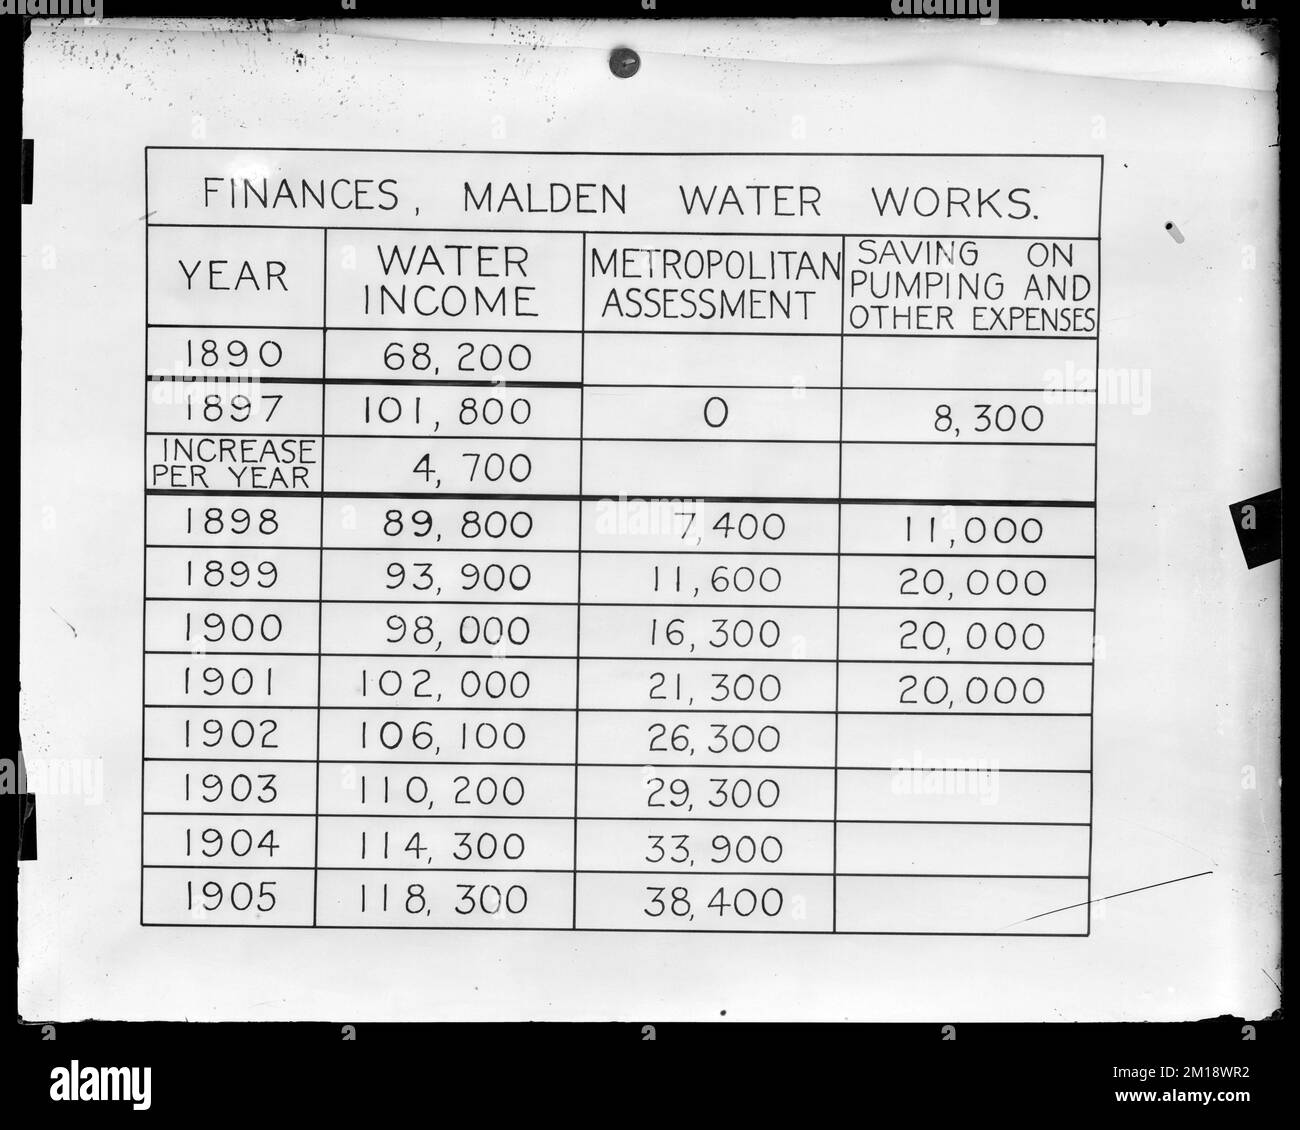 Tables, income and assessment, Malden Water Works, 1890-1905, Mass., ca. 1905 , waterworks, tables documents Stock Photo